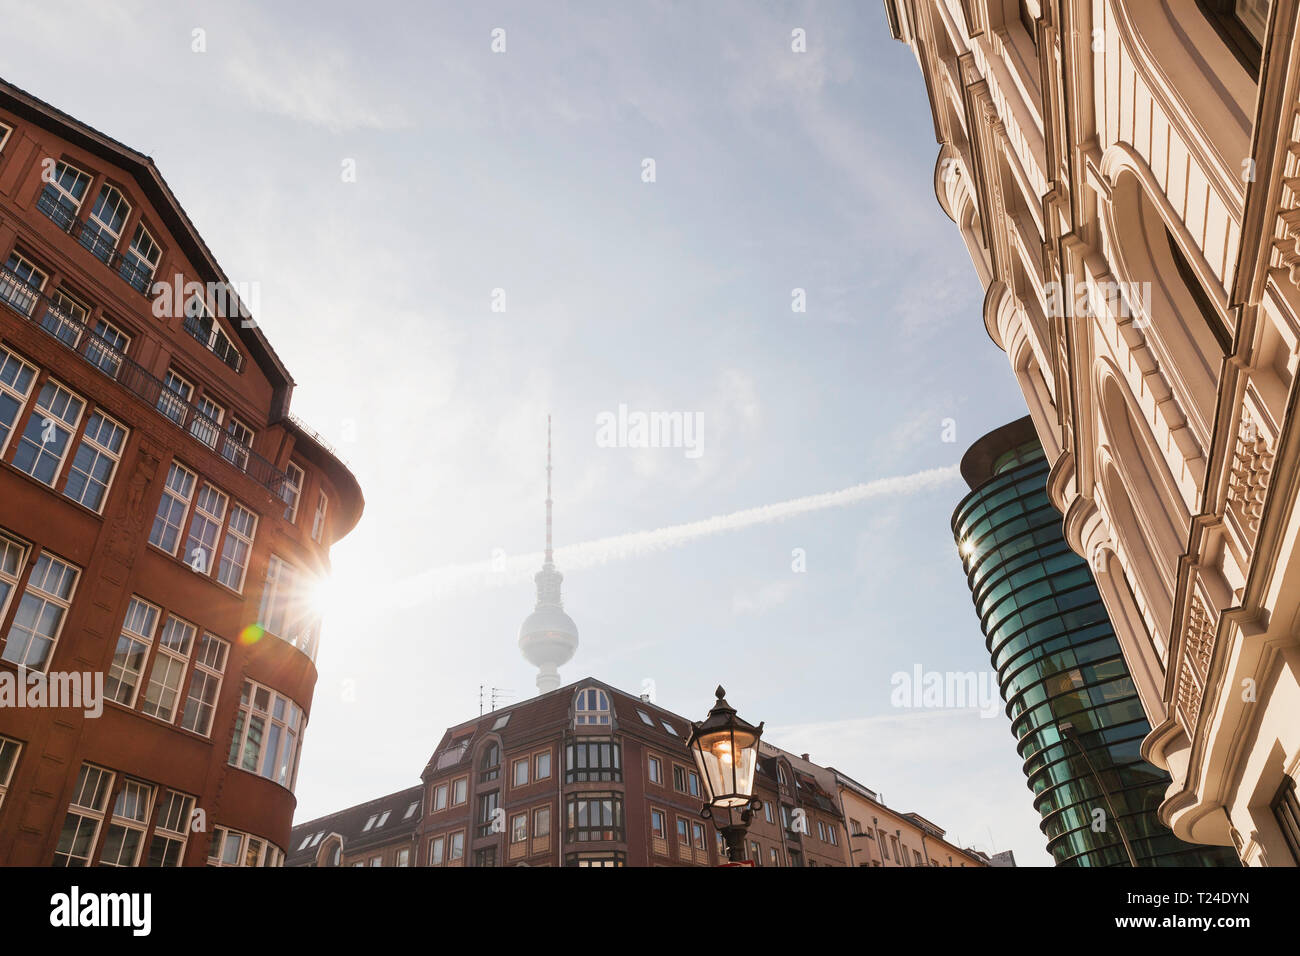 Germany, Berlin, buildings at Rosenthaler Strasse with television tower in the background at morning Stock Photo